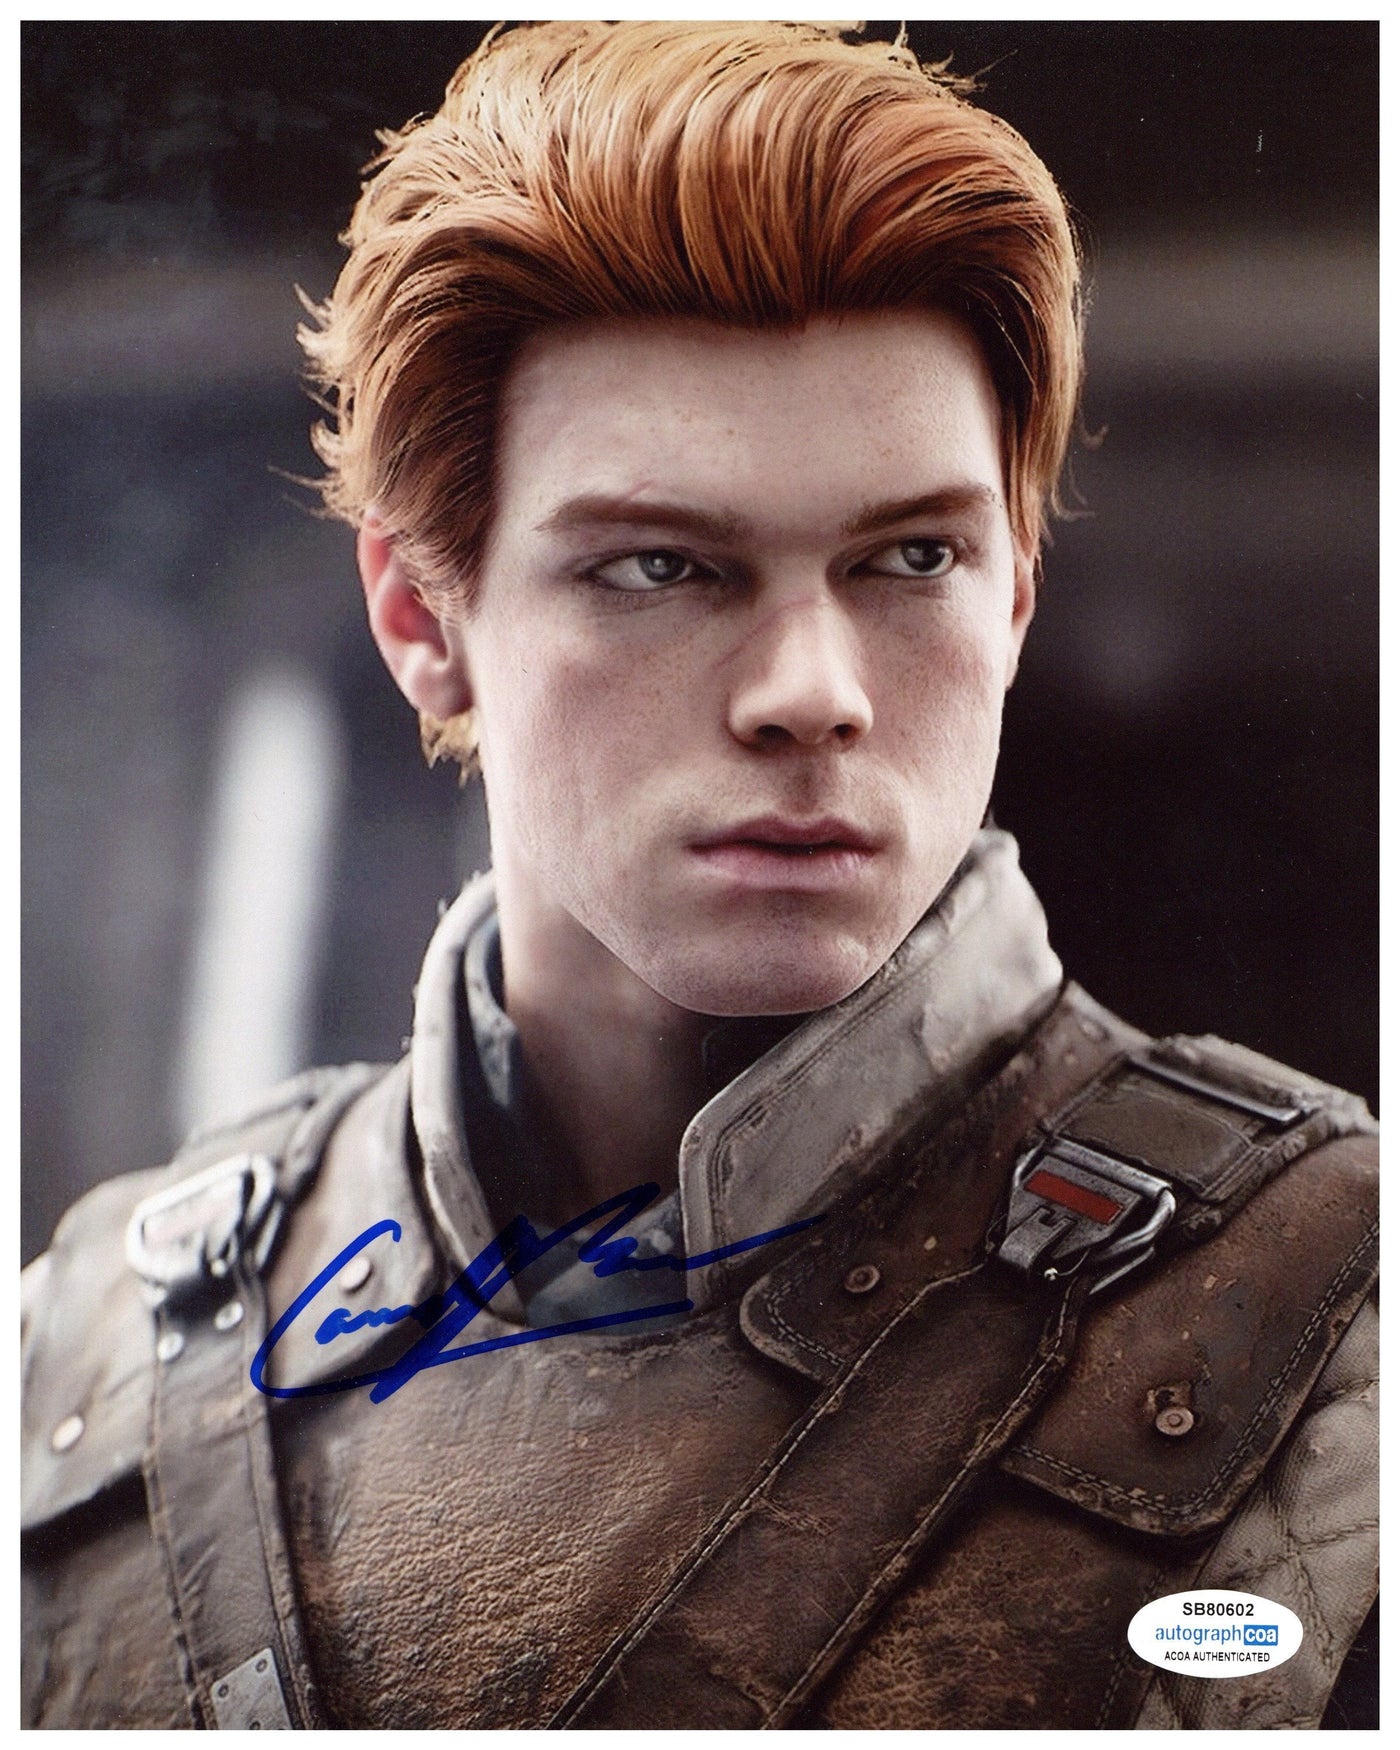 CAMERON MONAGHAN SIGNED 8X10 PHOTO STAR WARS JEDI FALLEN ORDER AUTOGRAPHED ACOA